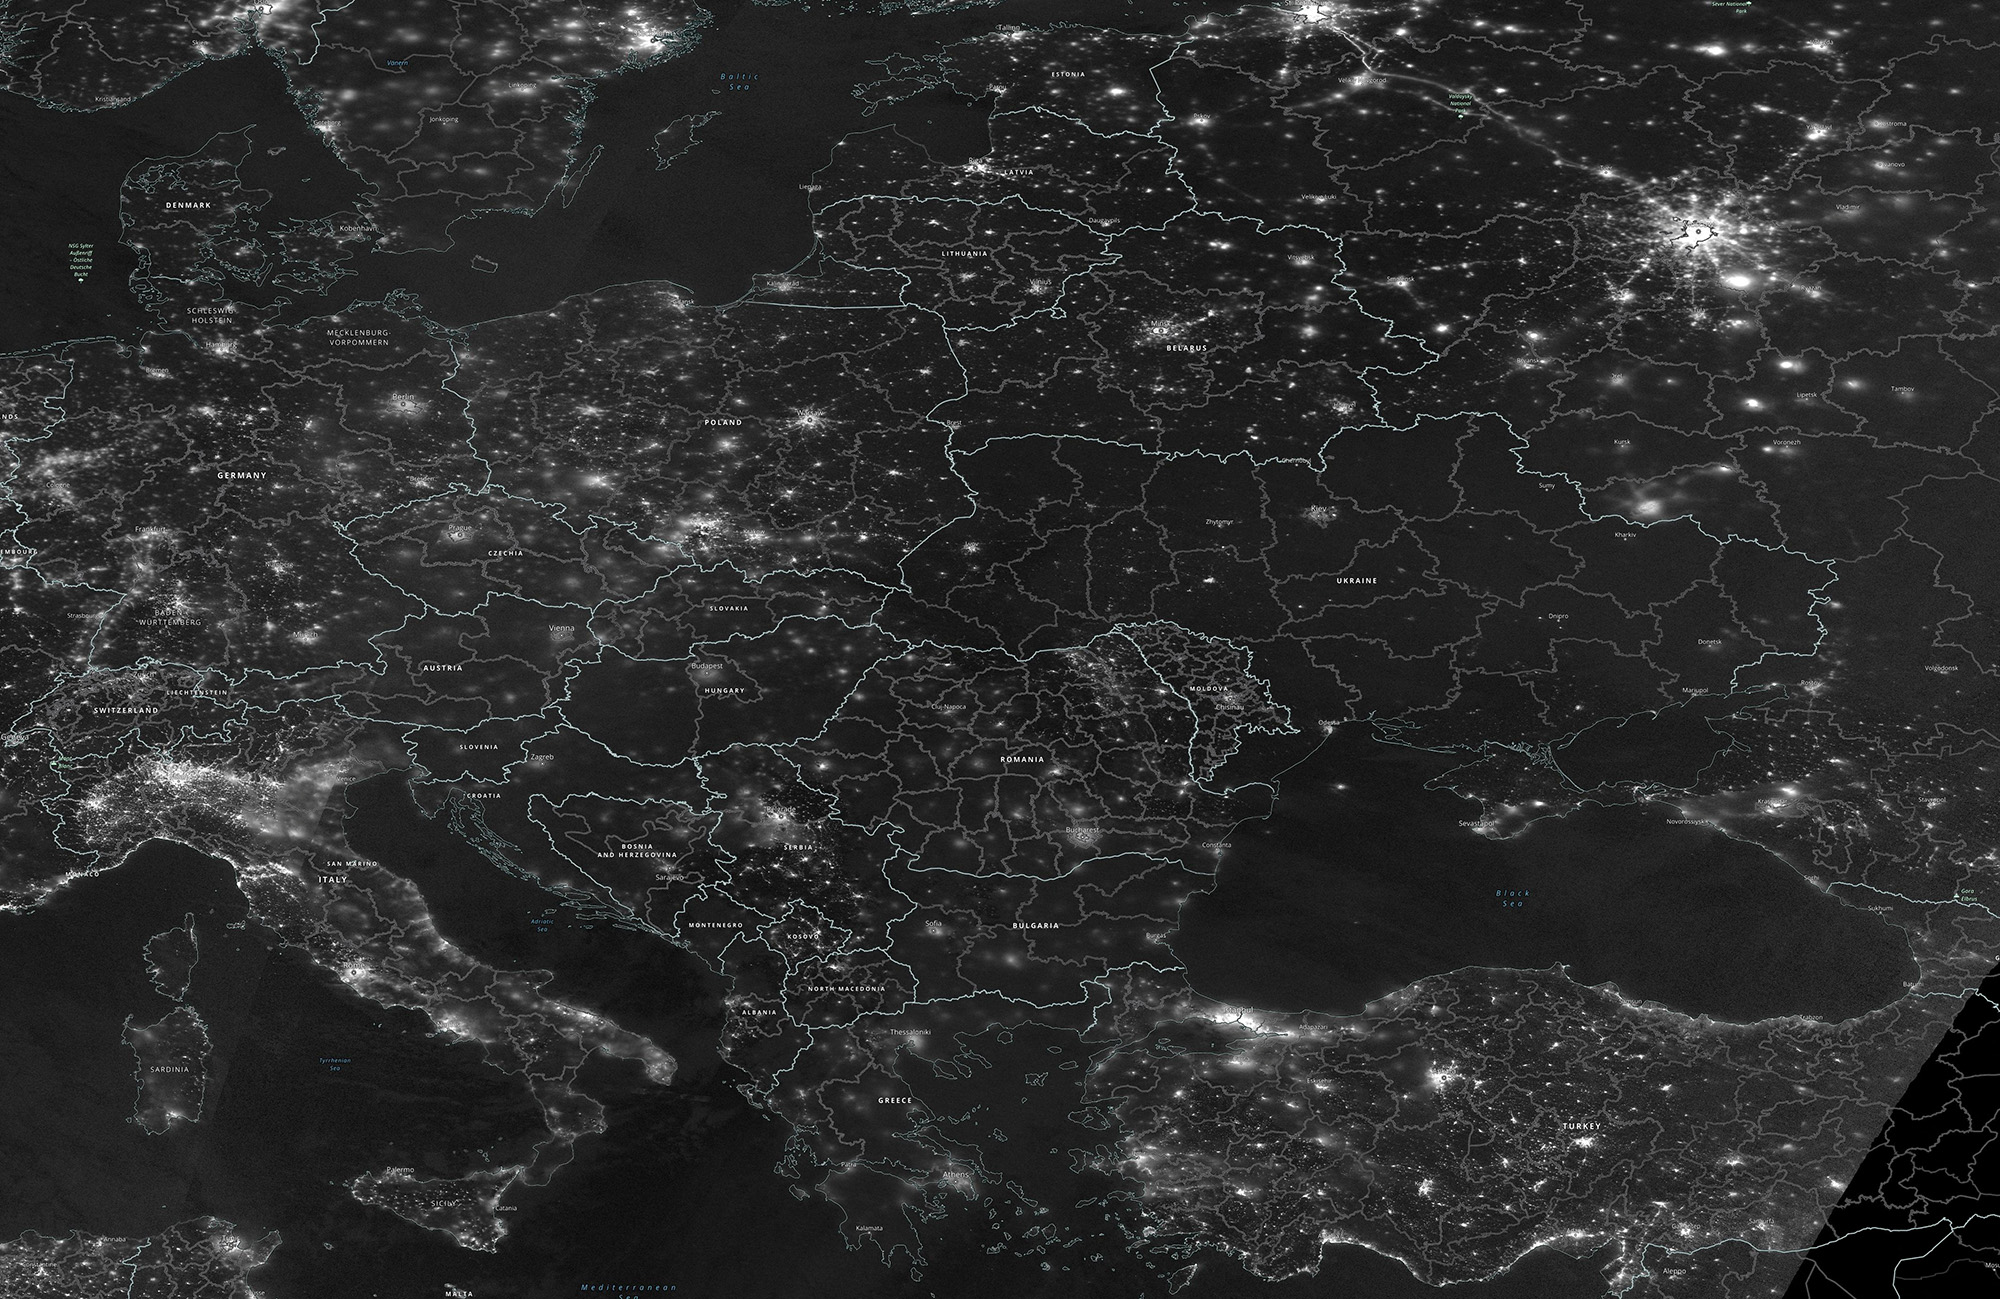 A greyscale satellite image indicating the night radiance of Europe from space on November 23.